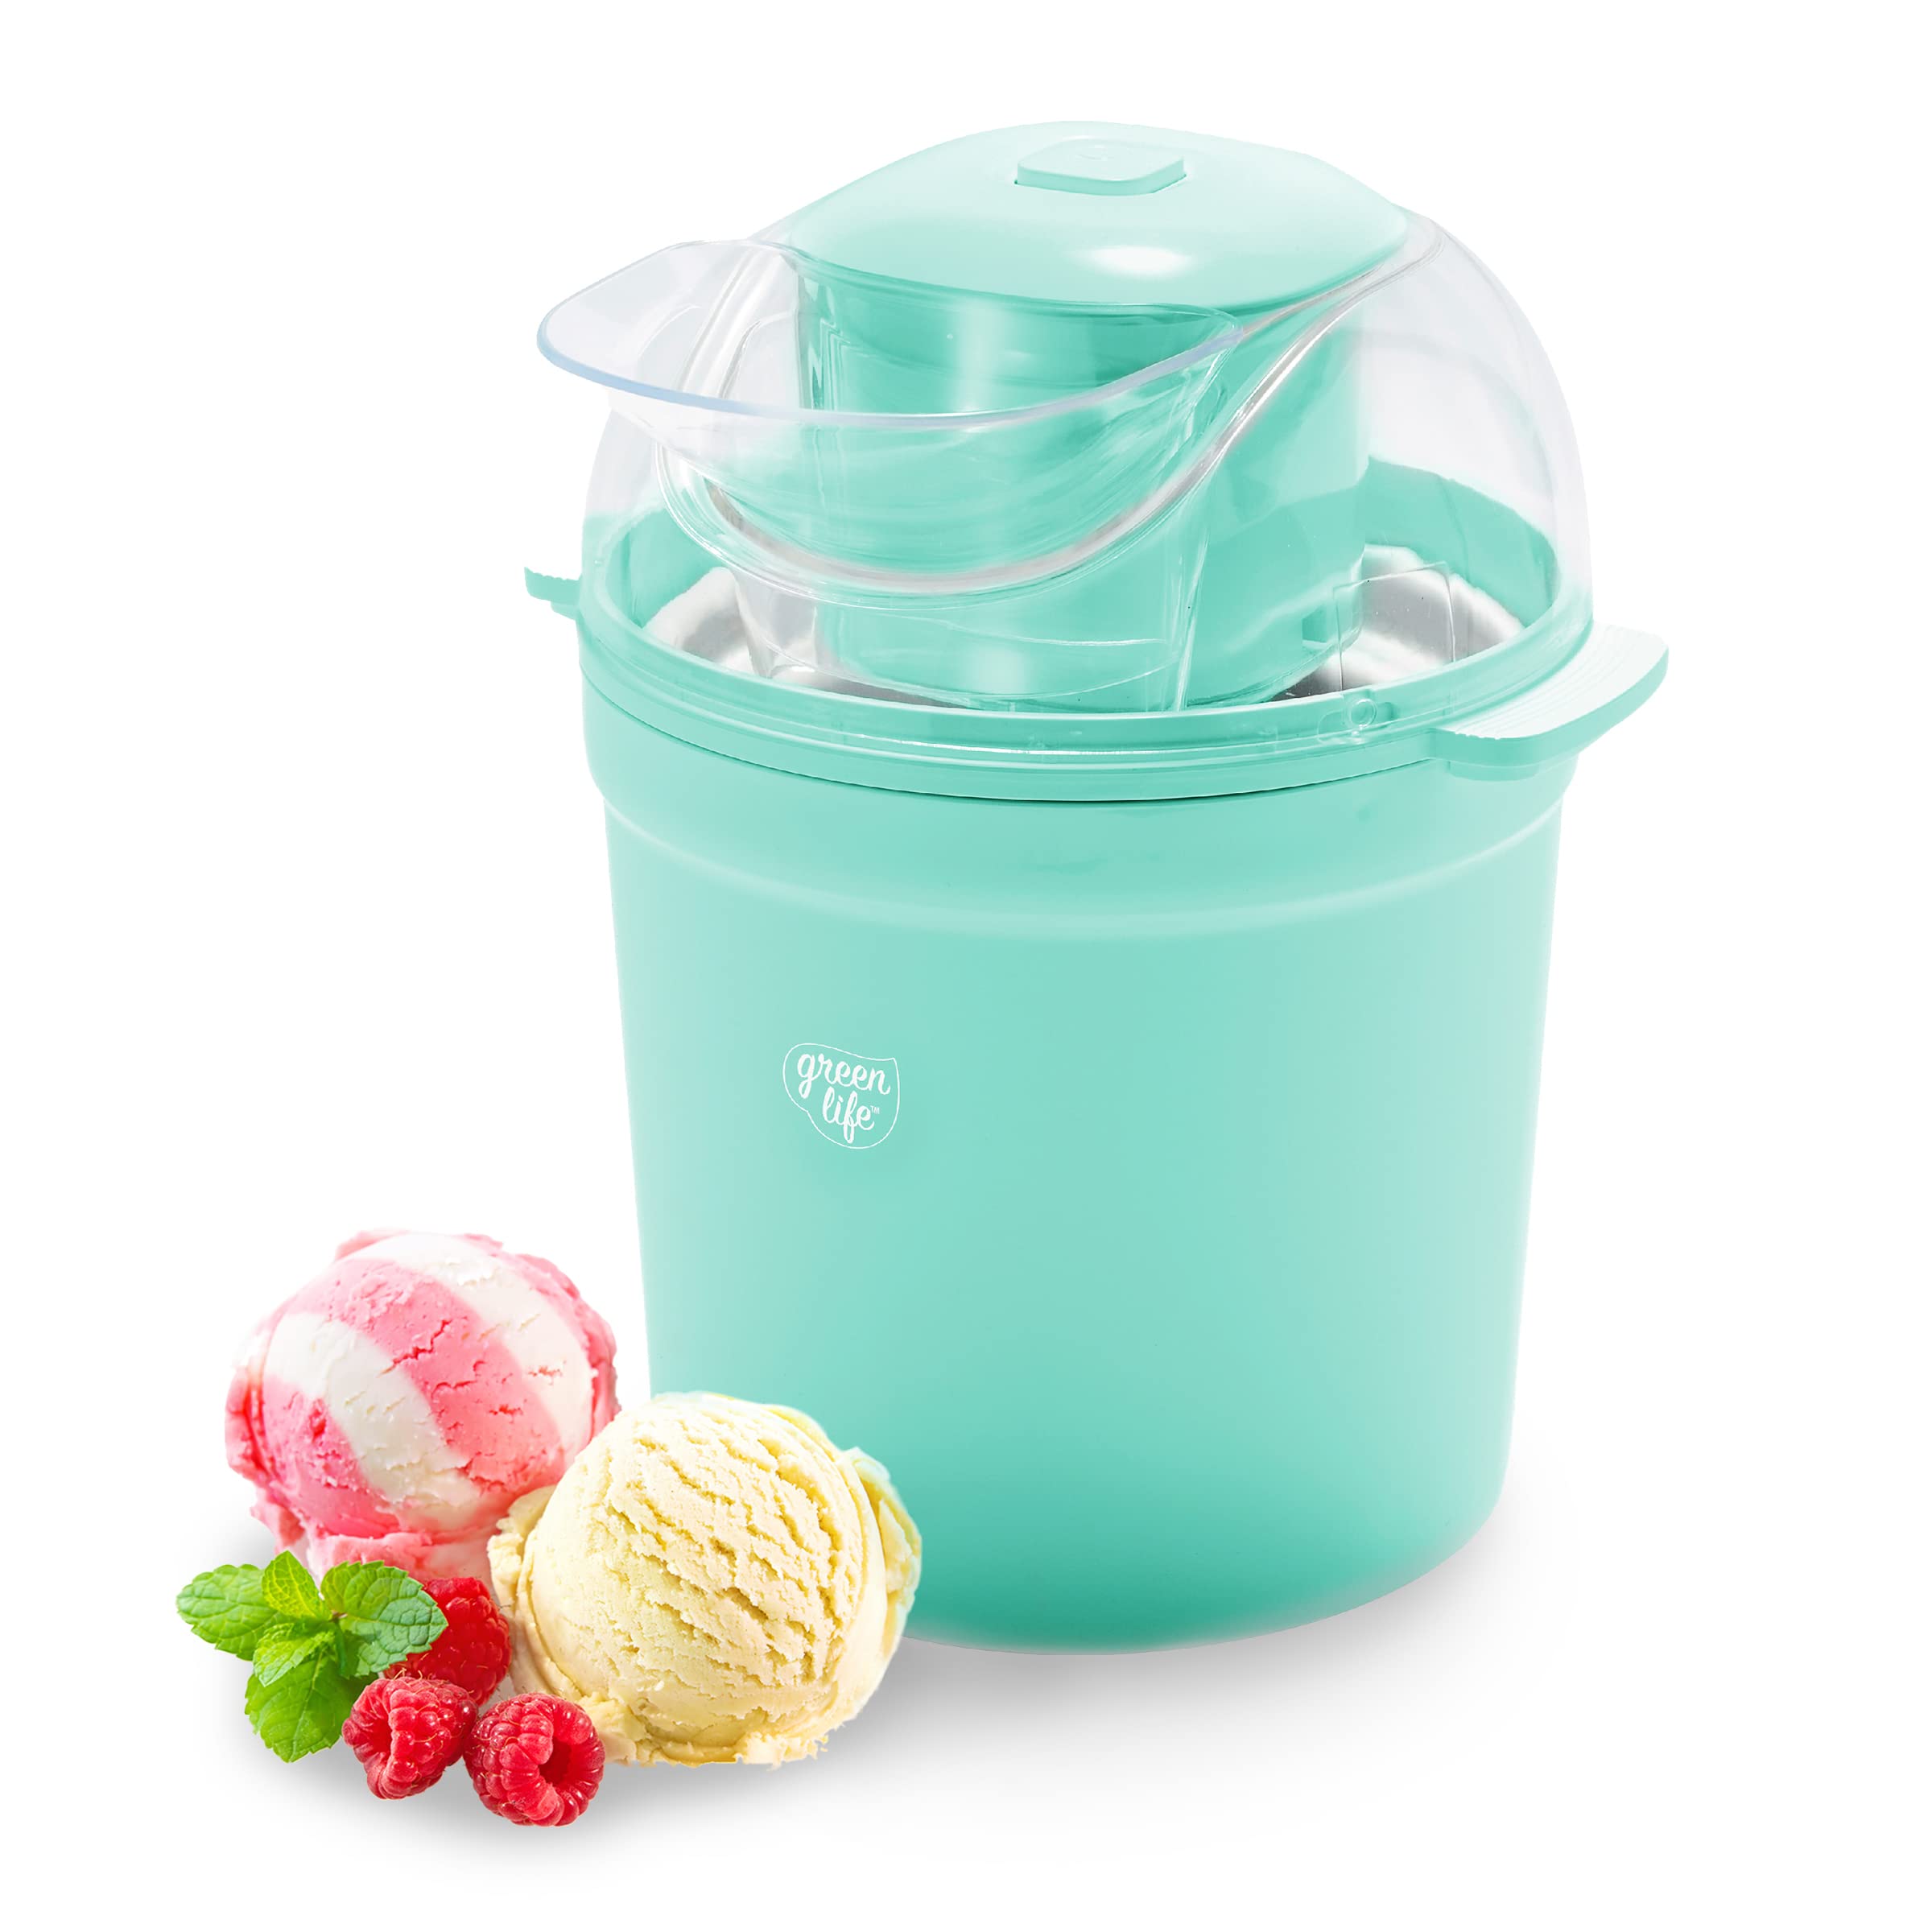 GreenLife Healthy Ceramic Nonstick 1.5QT Express Ice Cream Maker, Turquoise